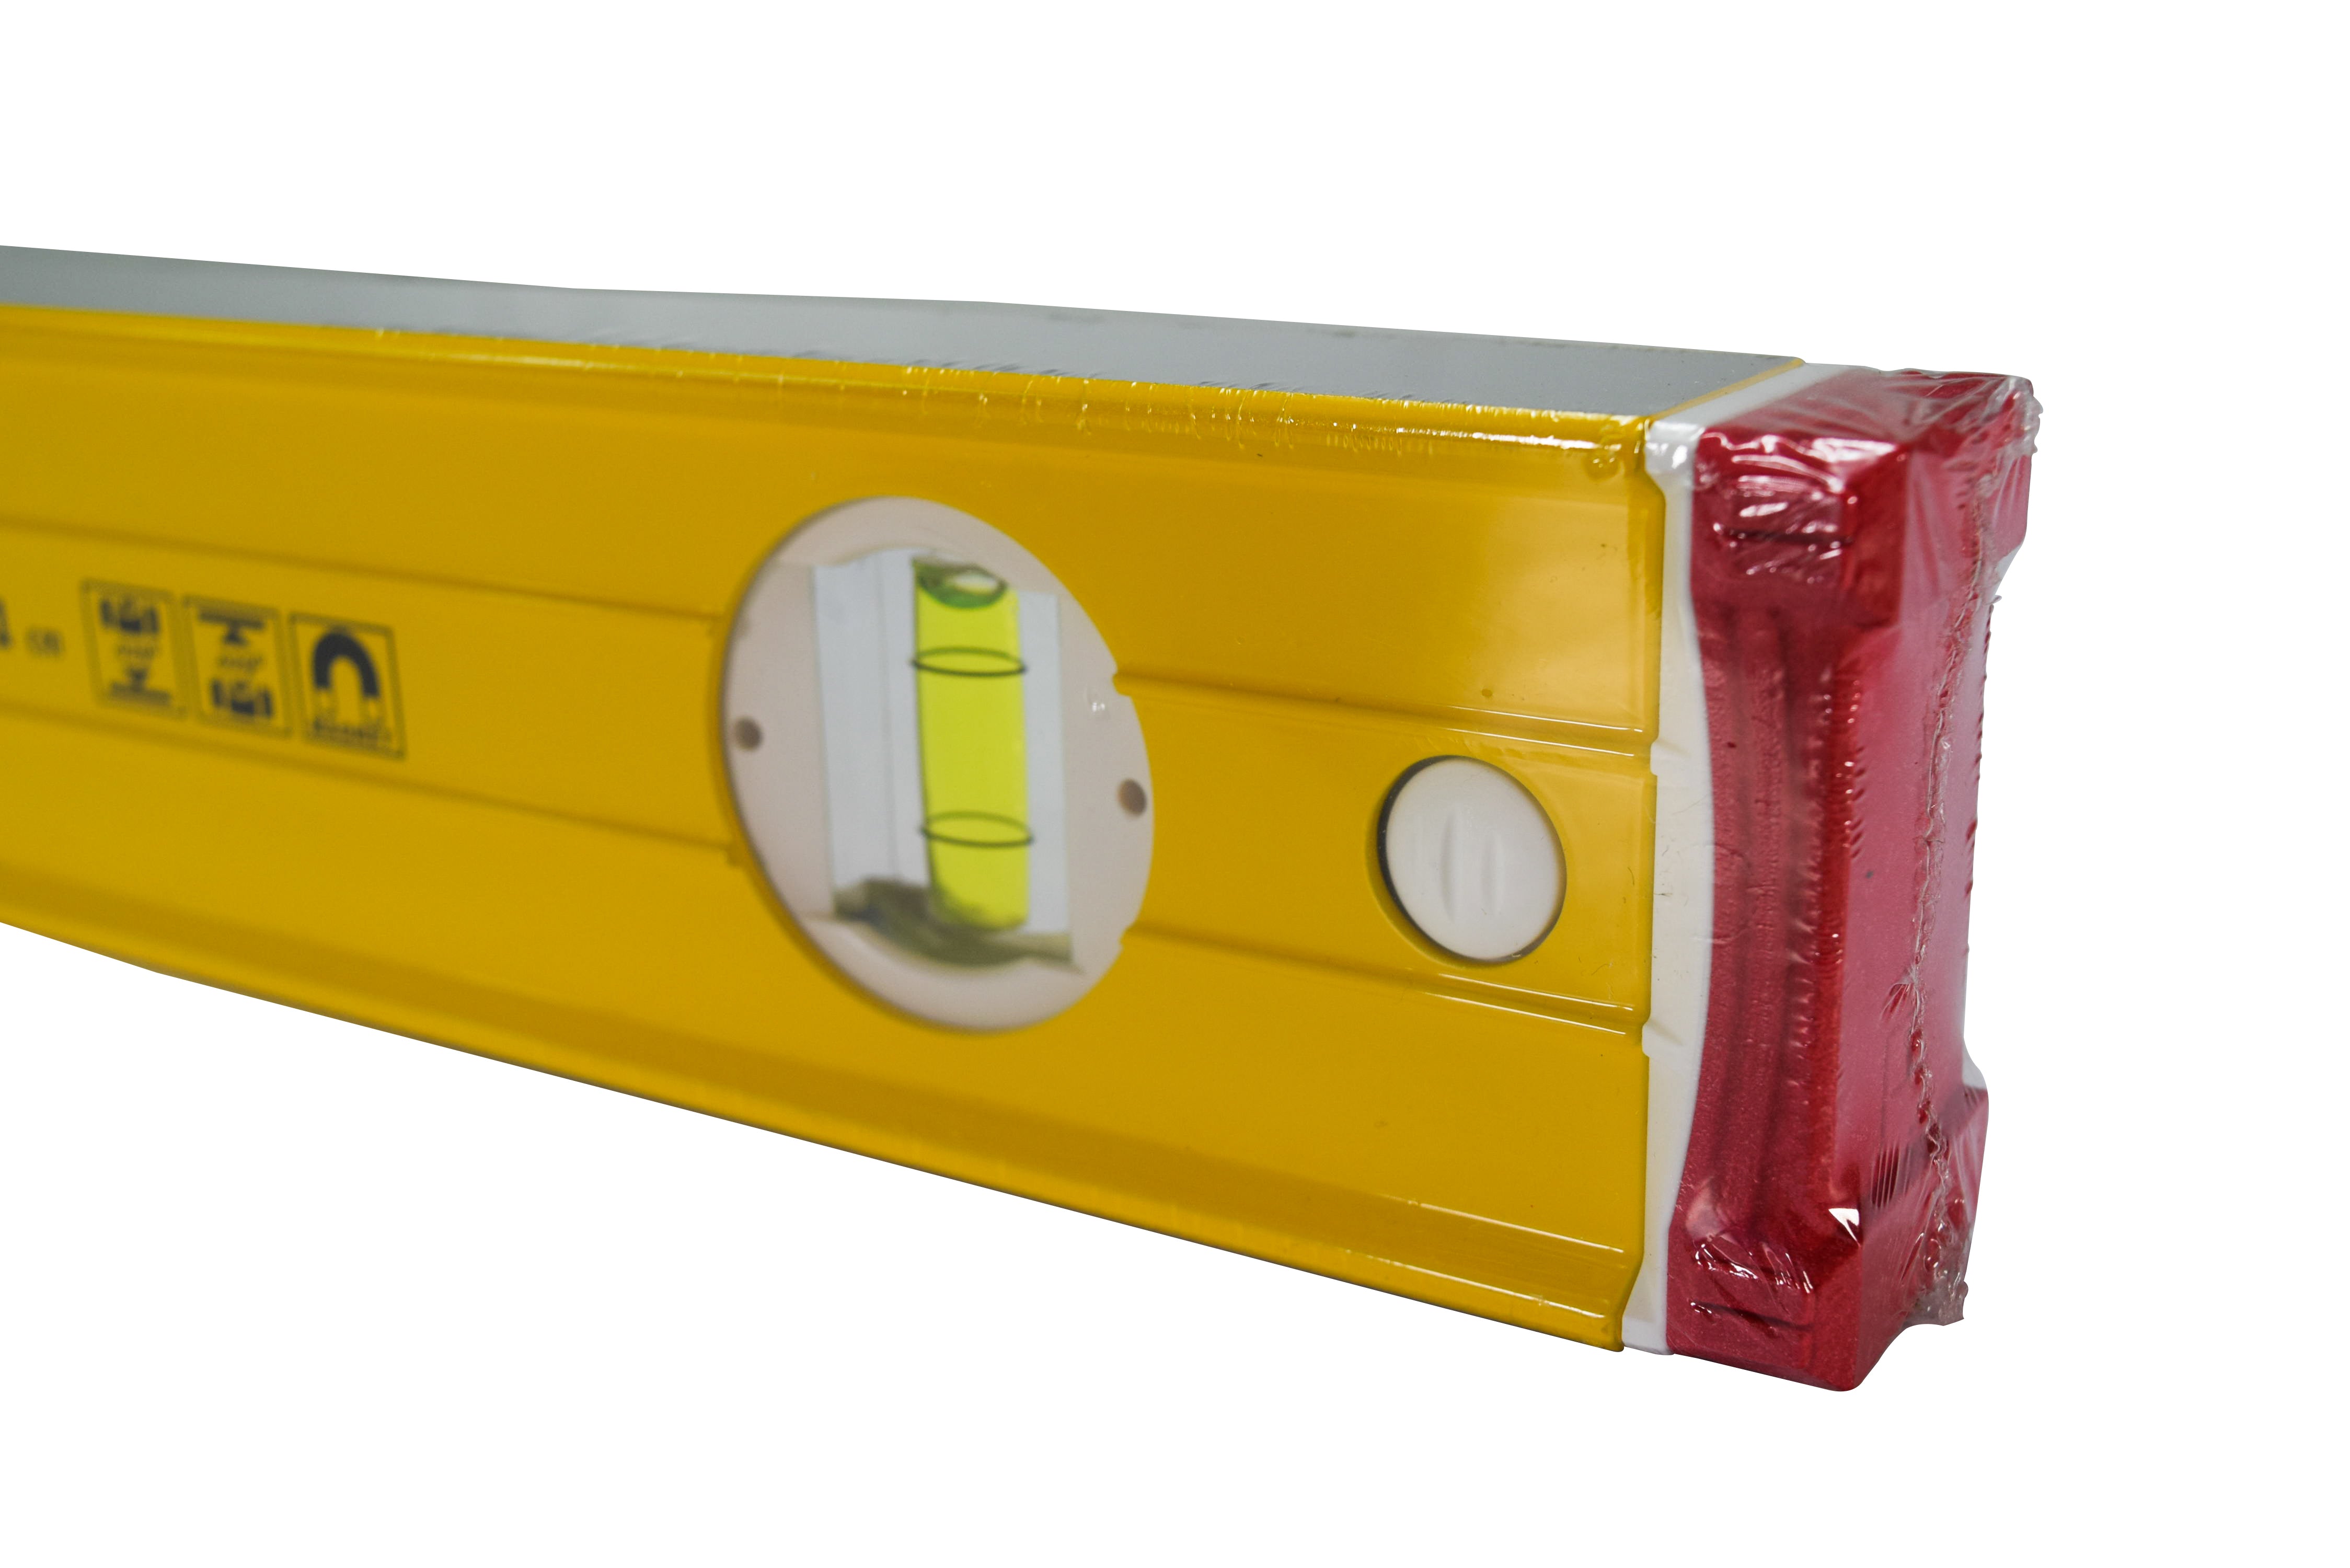 Stabila 38624 24" Extra Rigid Yellow Magnetic Level w/ Reinforcing Ribs